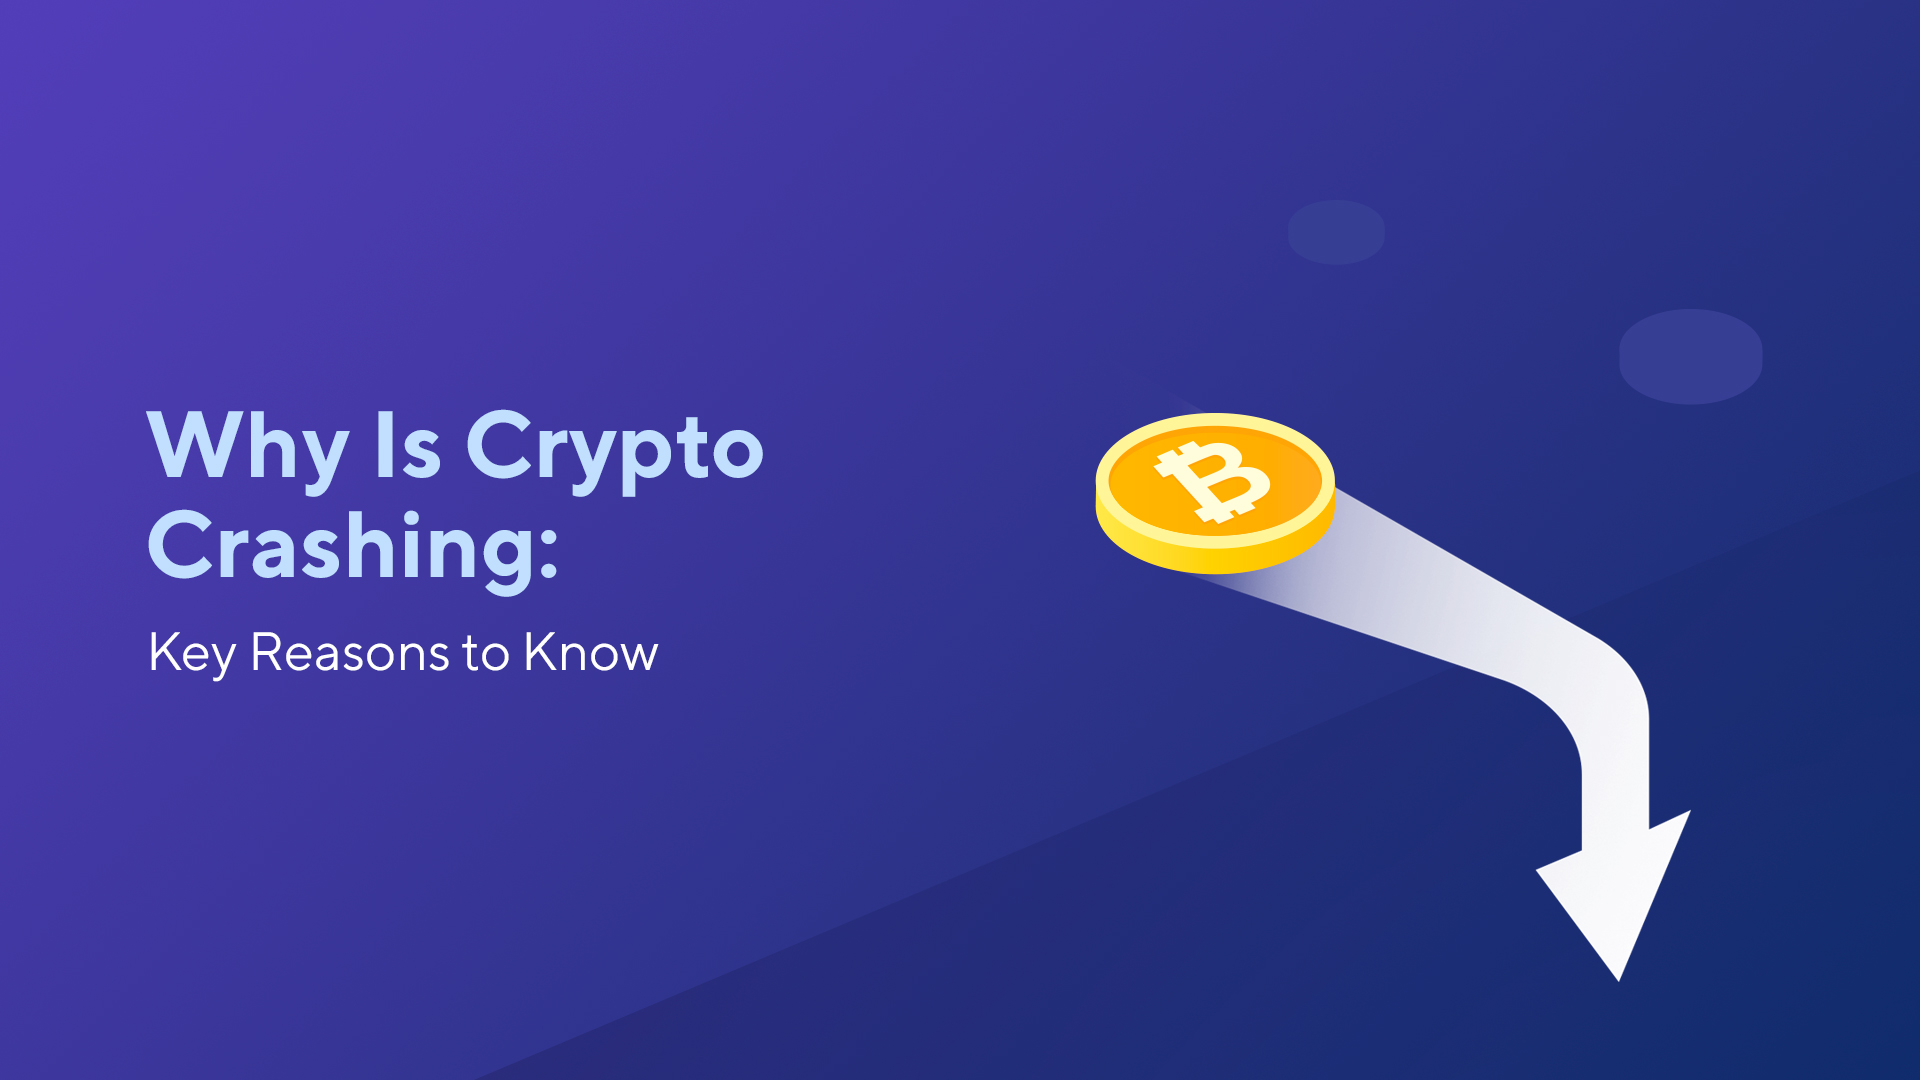 Why Is Crypto Crashing: Key Reasons to Know